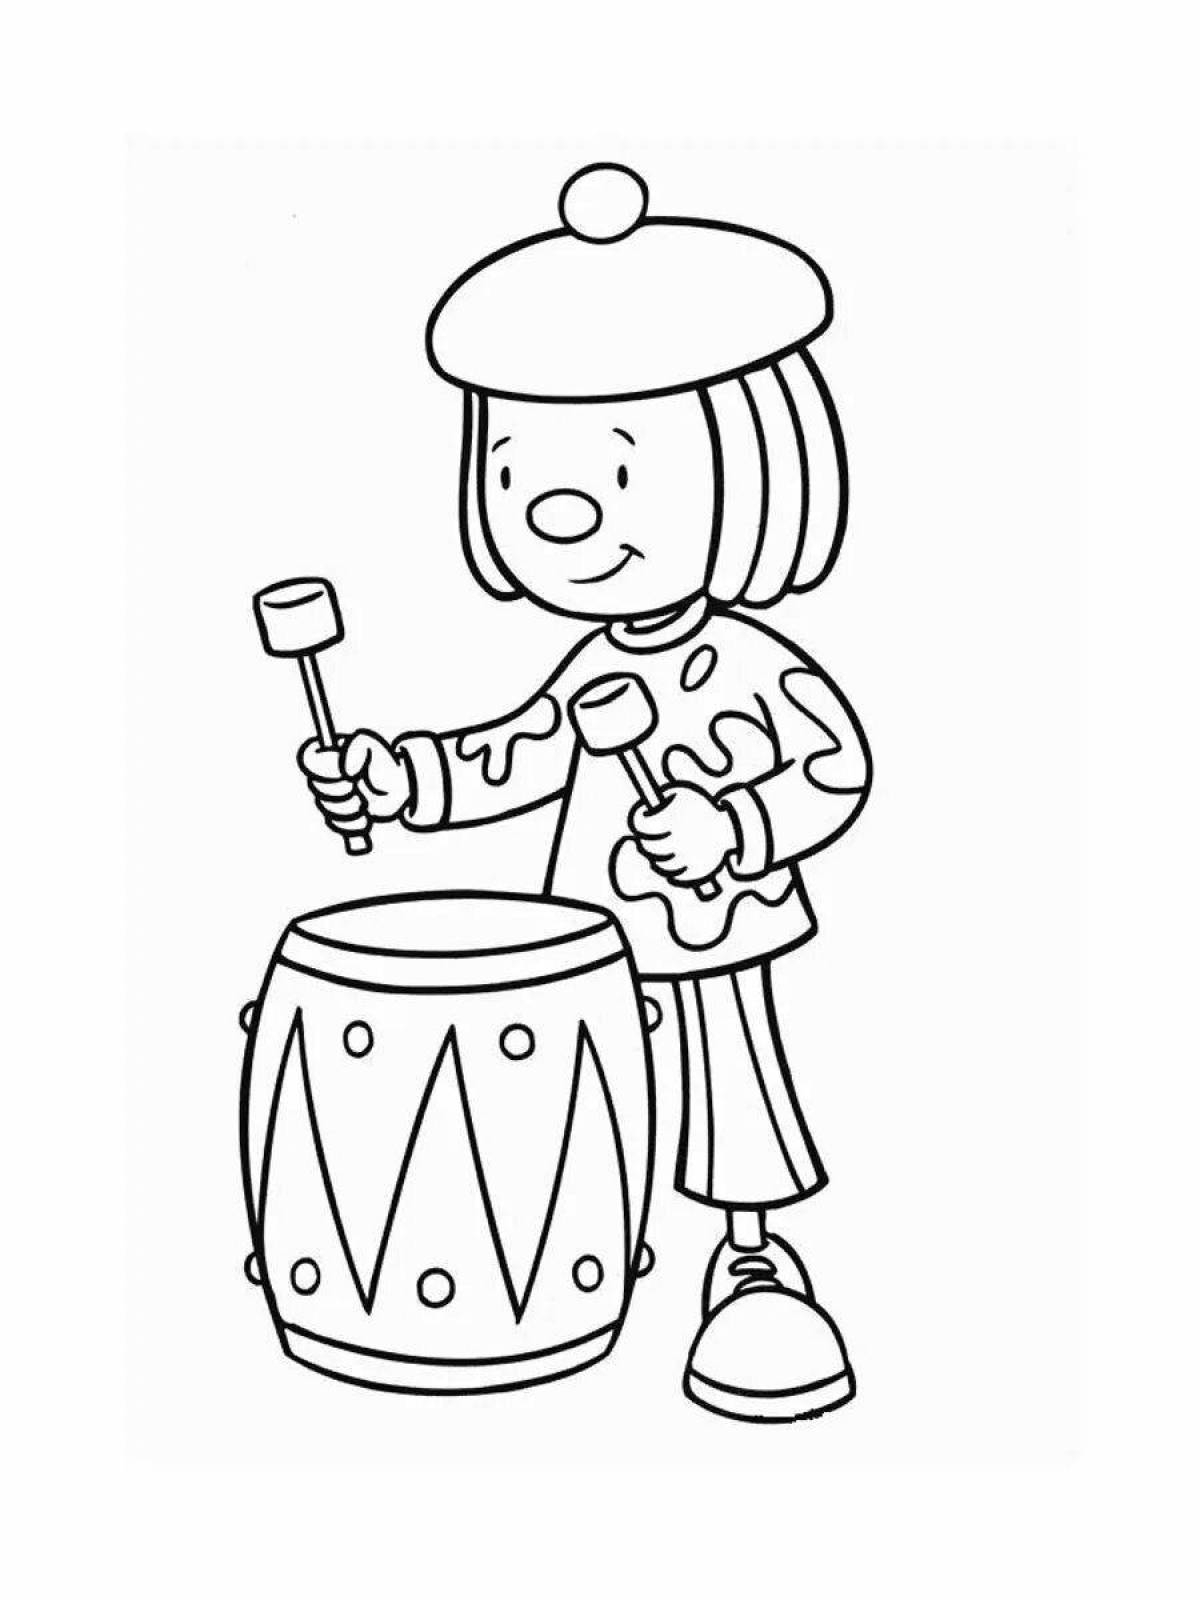 Bright drum coloring for children 3-4 years old